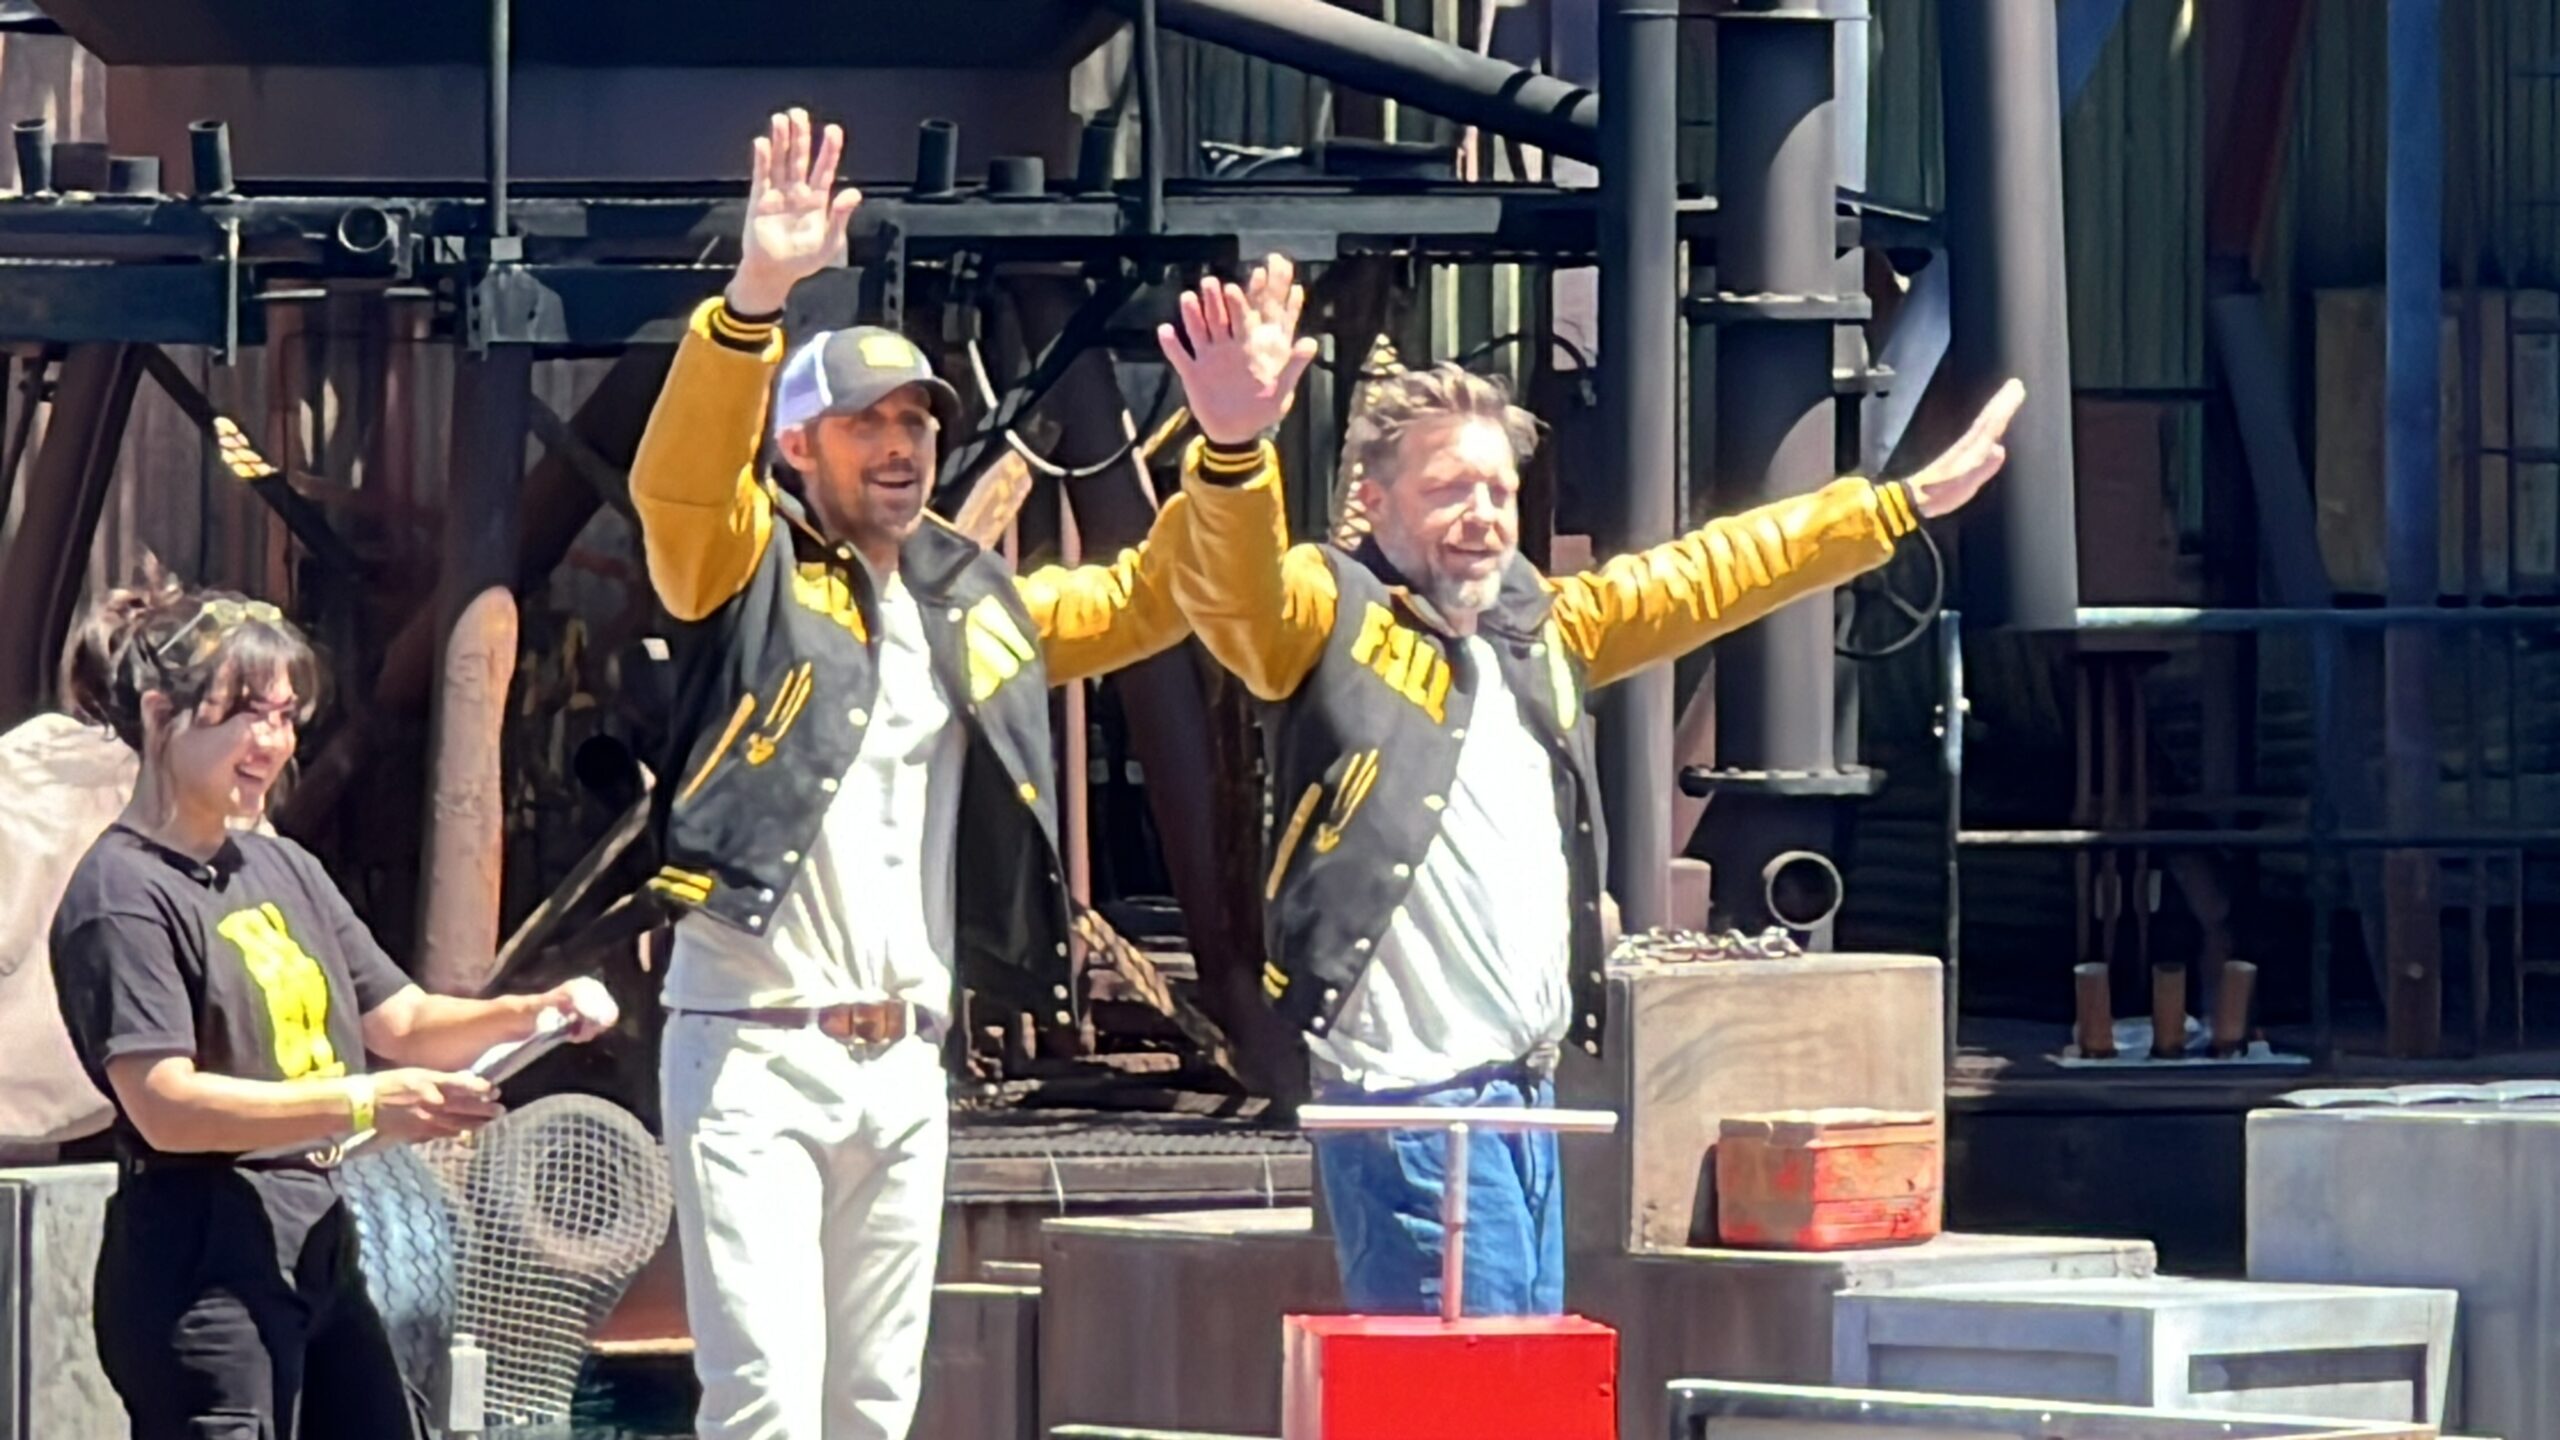 Ryan Gosling and director David Leitch surprise guests at Universal Studios Hollywoood during kick-off for "The Fall Guy" Stuntacular Pre-Show